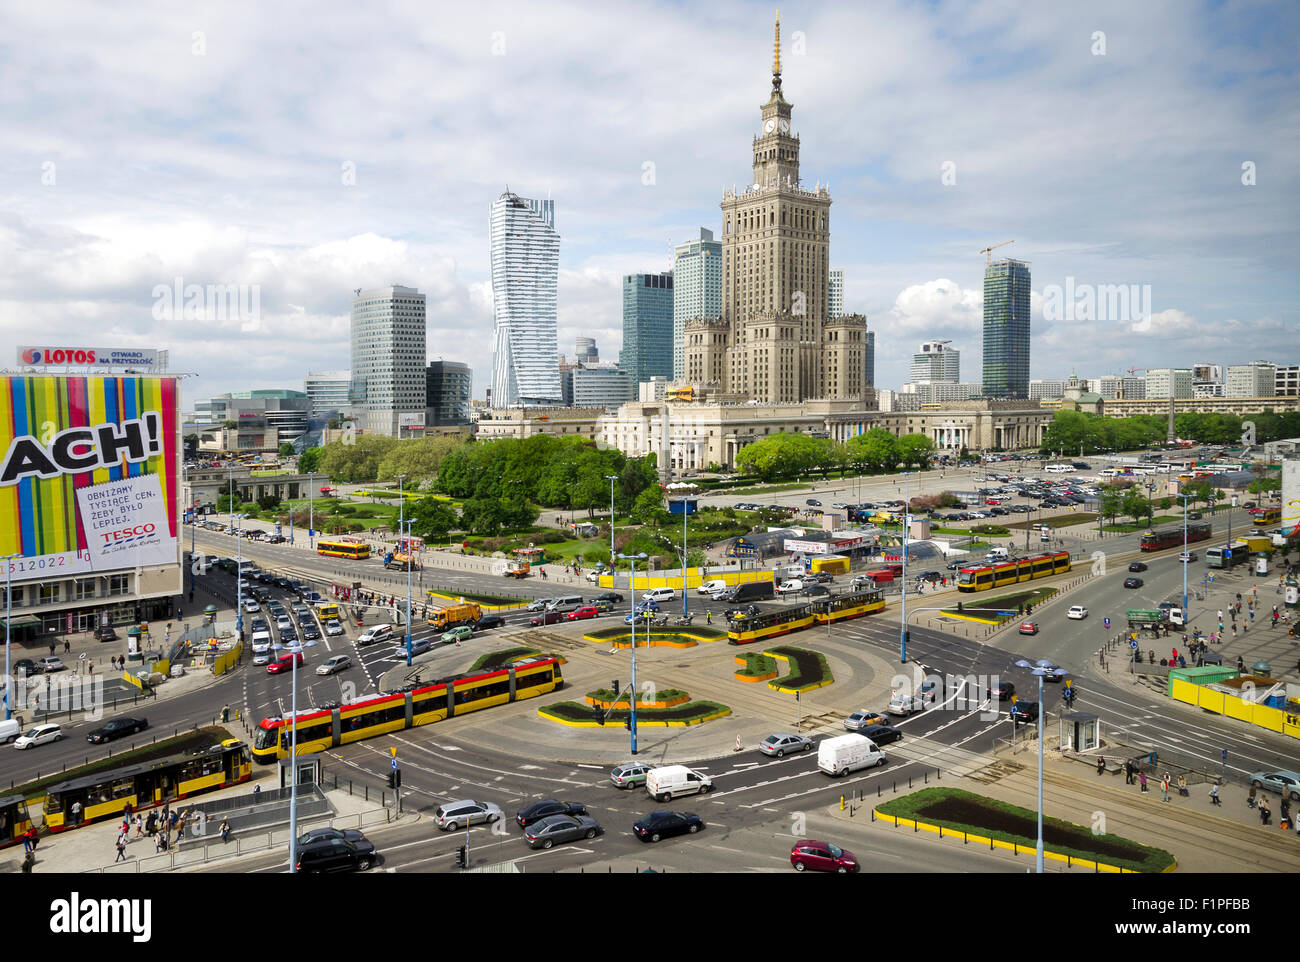 Rondo Marszalkowska street with Palace of Culture - Palac Kultury and other new architecture of central Warszawa, Warsaw, Poland Stock Photo